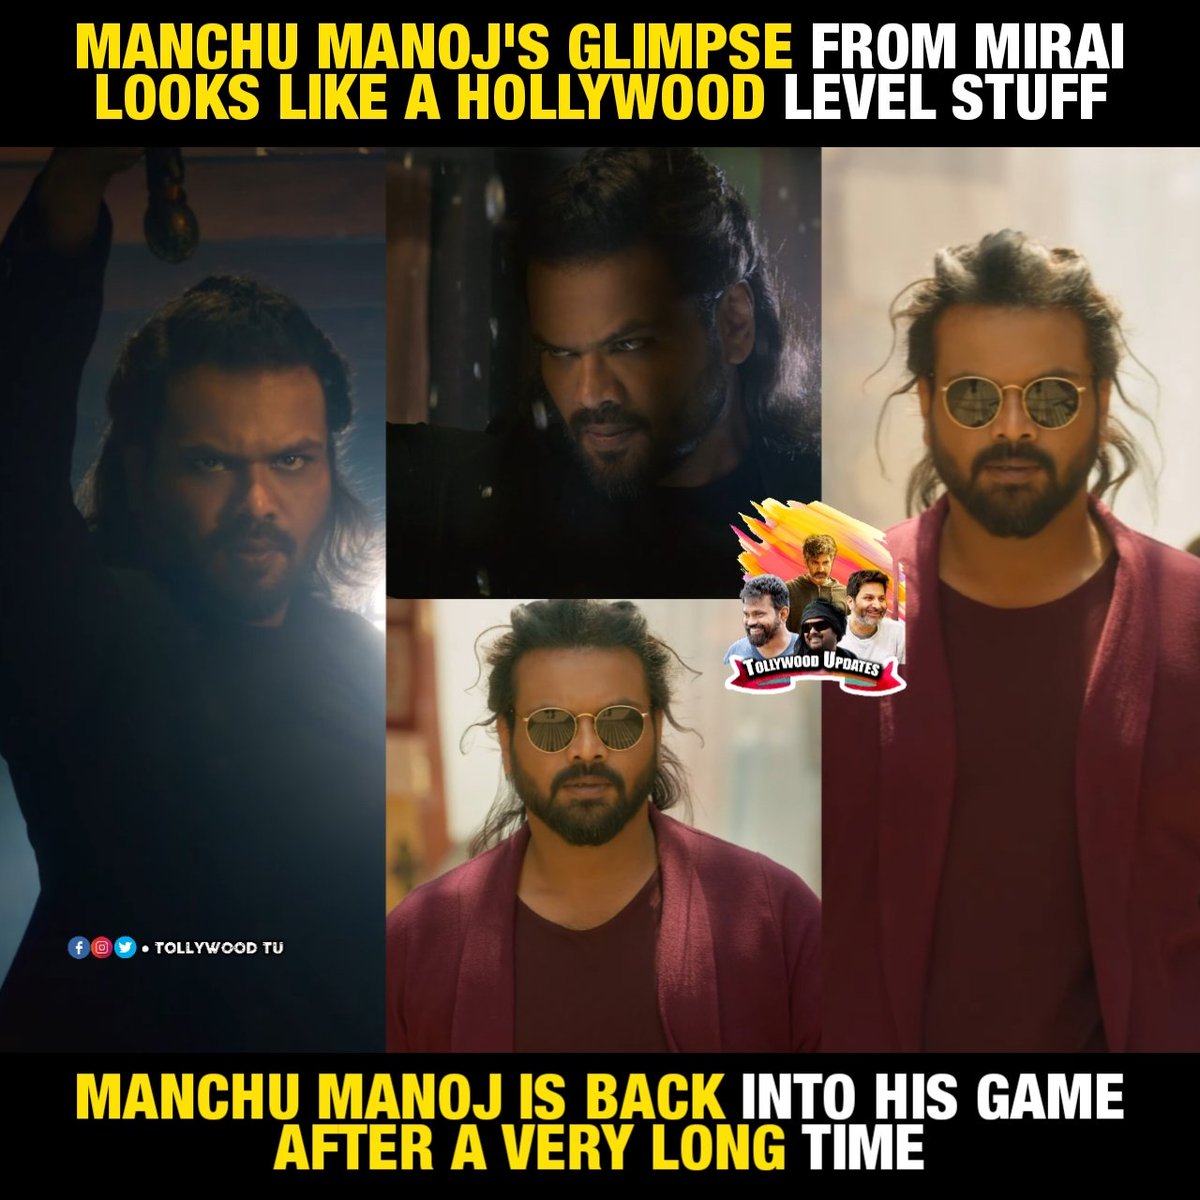 #ManchuManoj plays a negative role in #TejaSajja's #Mirai film. Manoj's glimpse from #Mirai is no less than Hollywood style making and content. It's going to be the next big thing from Telugu Cinema. #HappyBirthdayManchuManoj @HeroManoj1